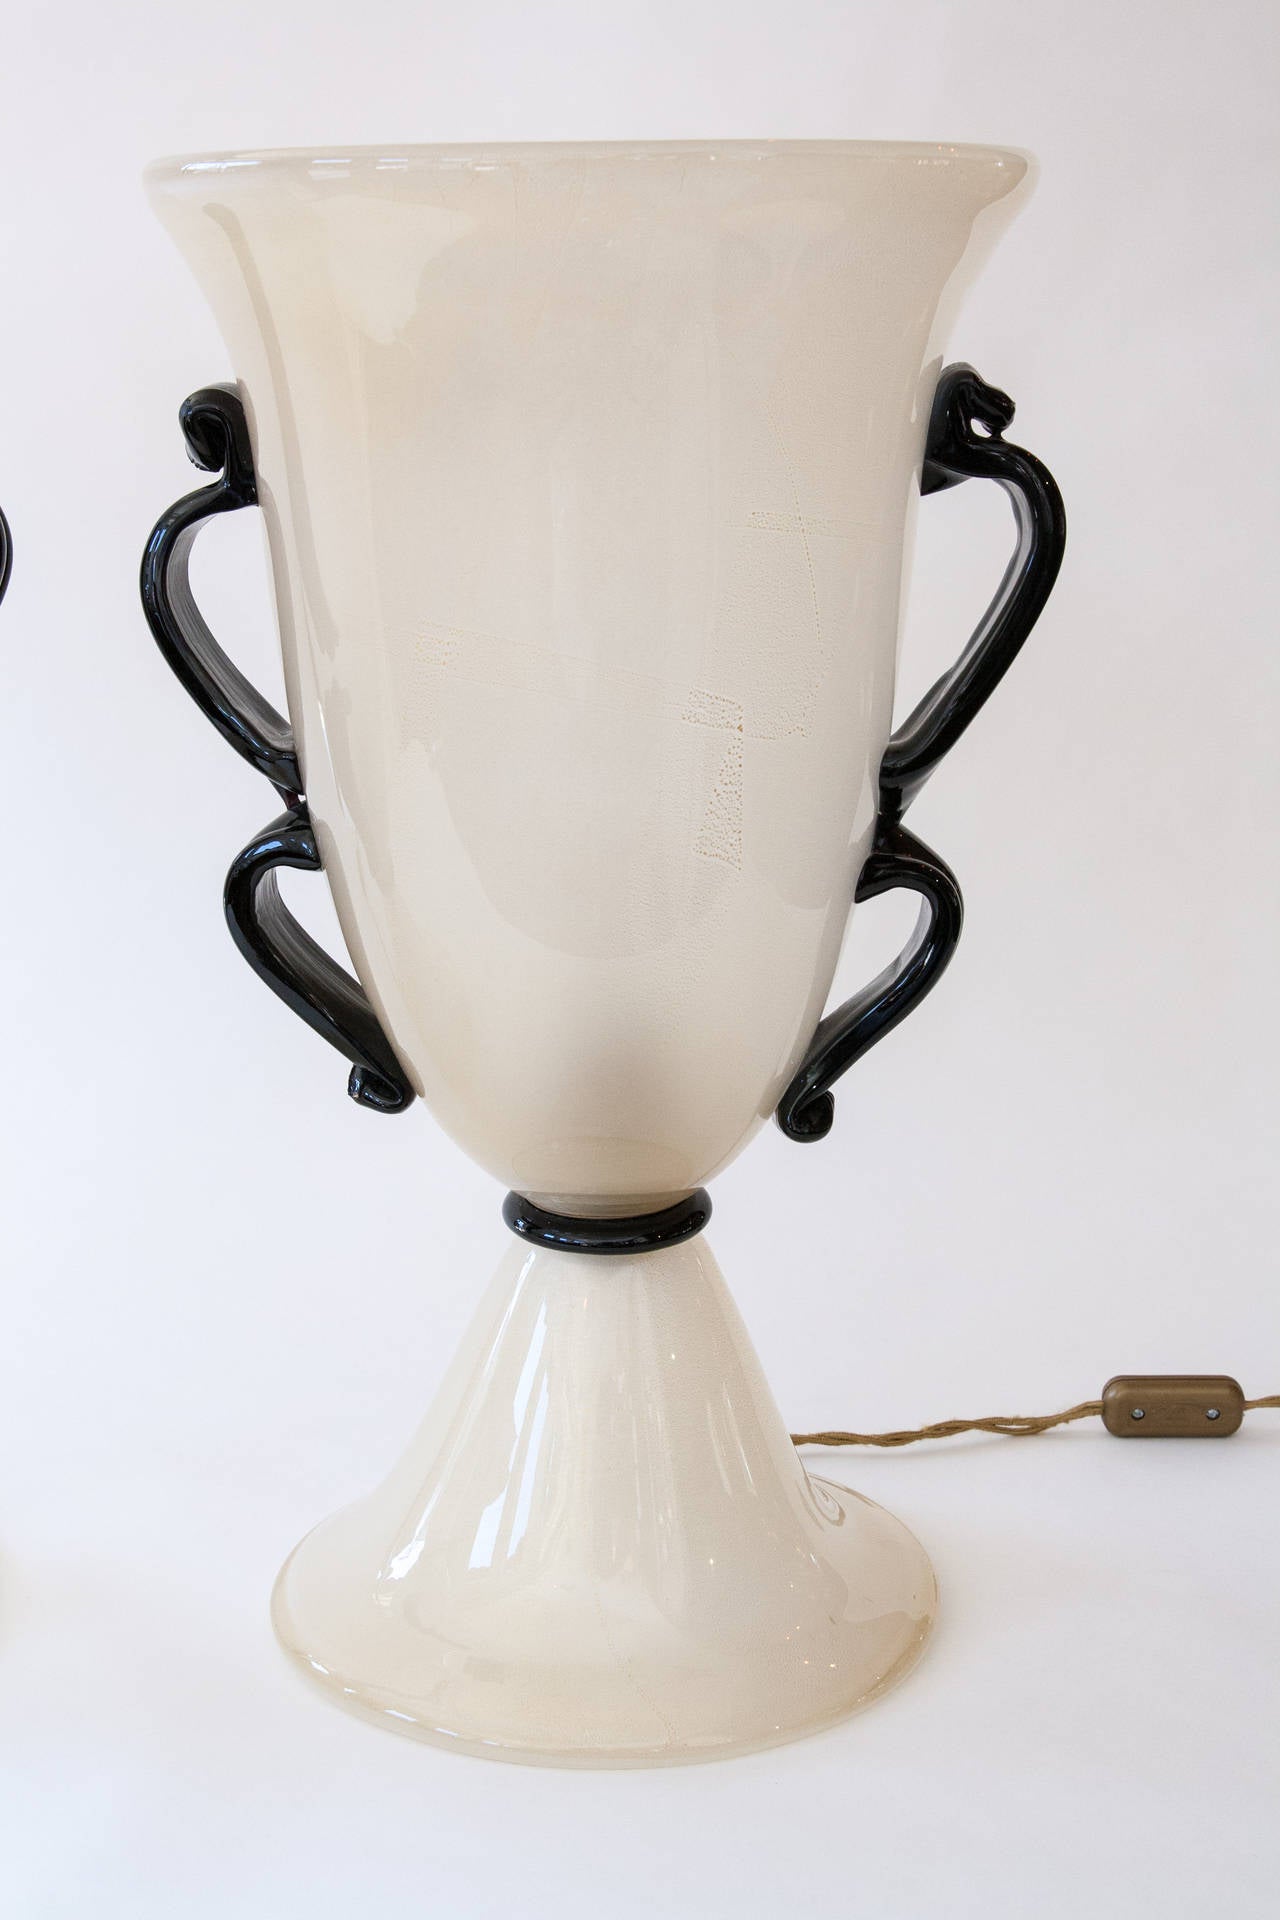 Exquisite pair of Murano blown gold on white uplight vases with black double handles, marked Barovier e Toso, circa 1960.